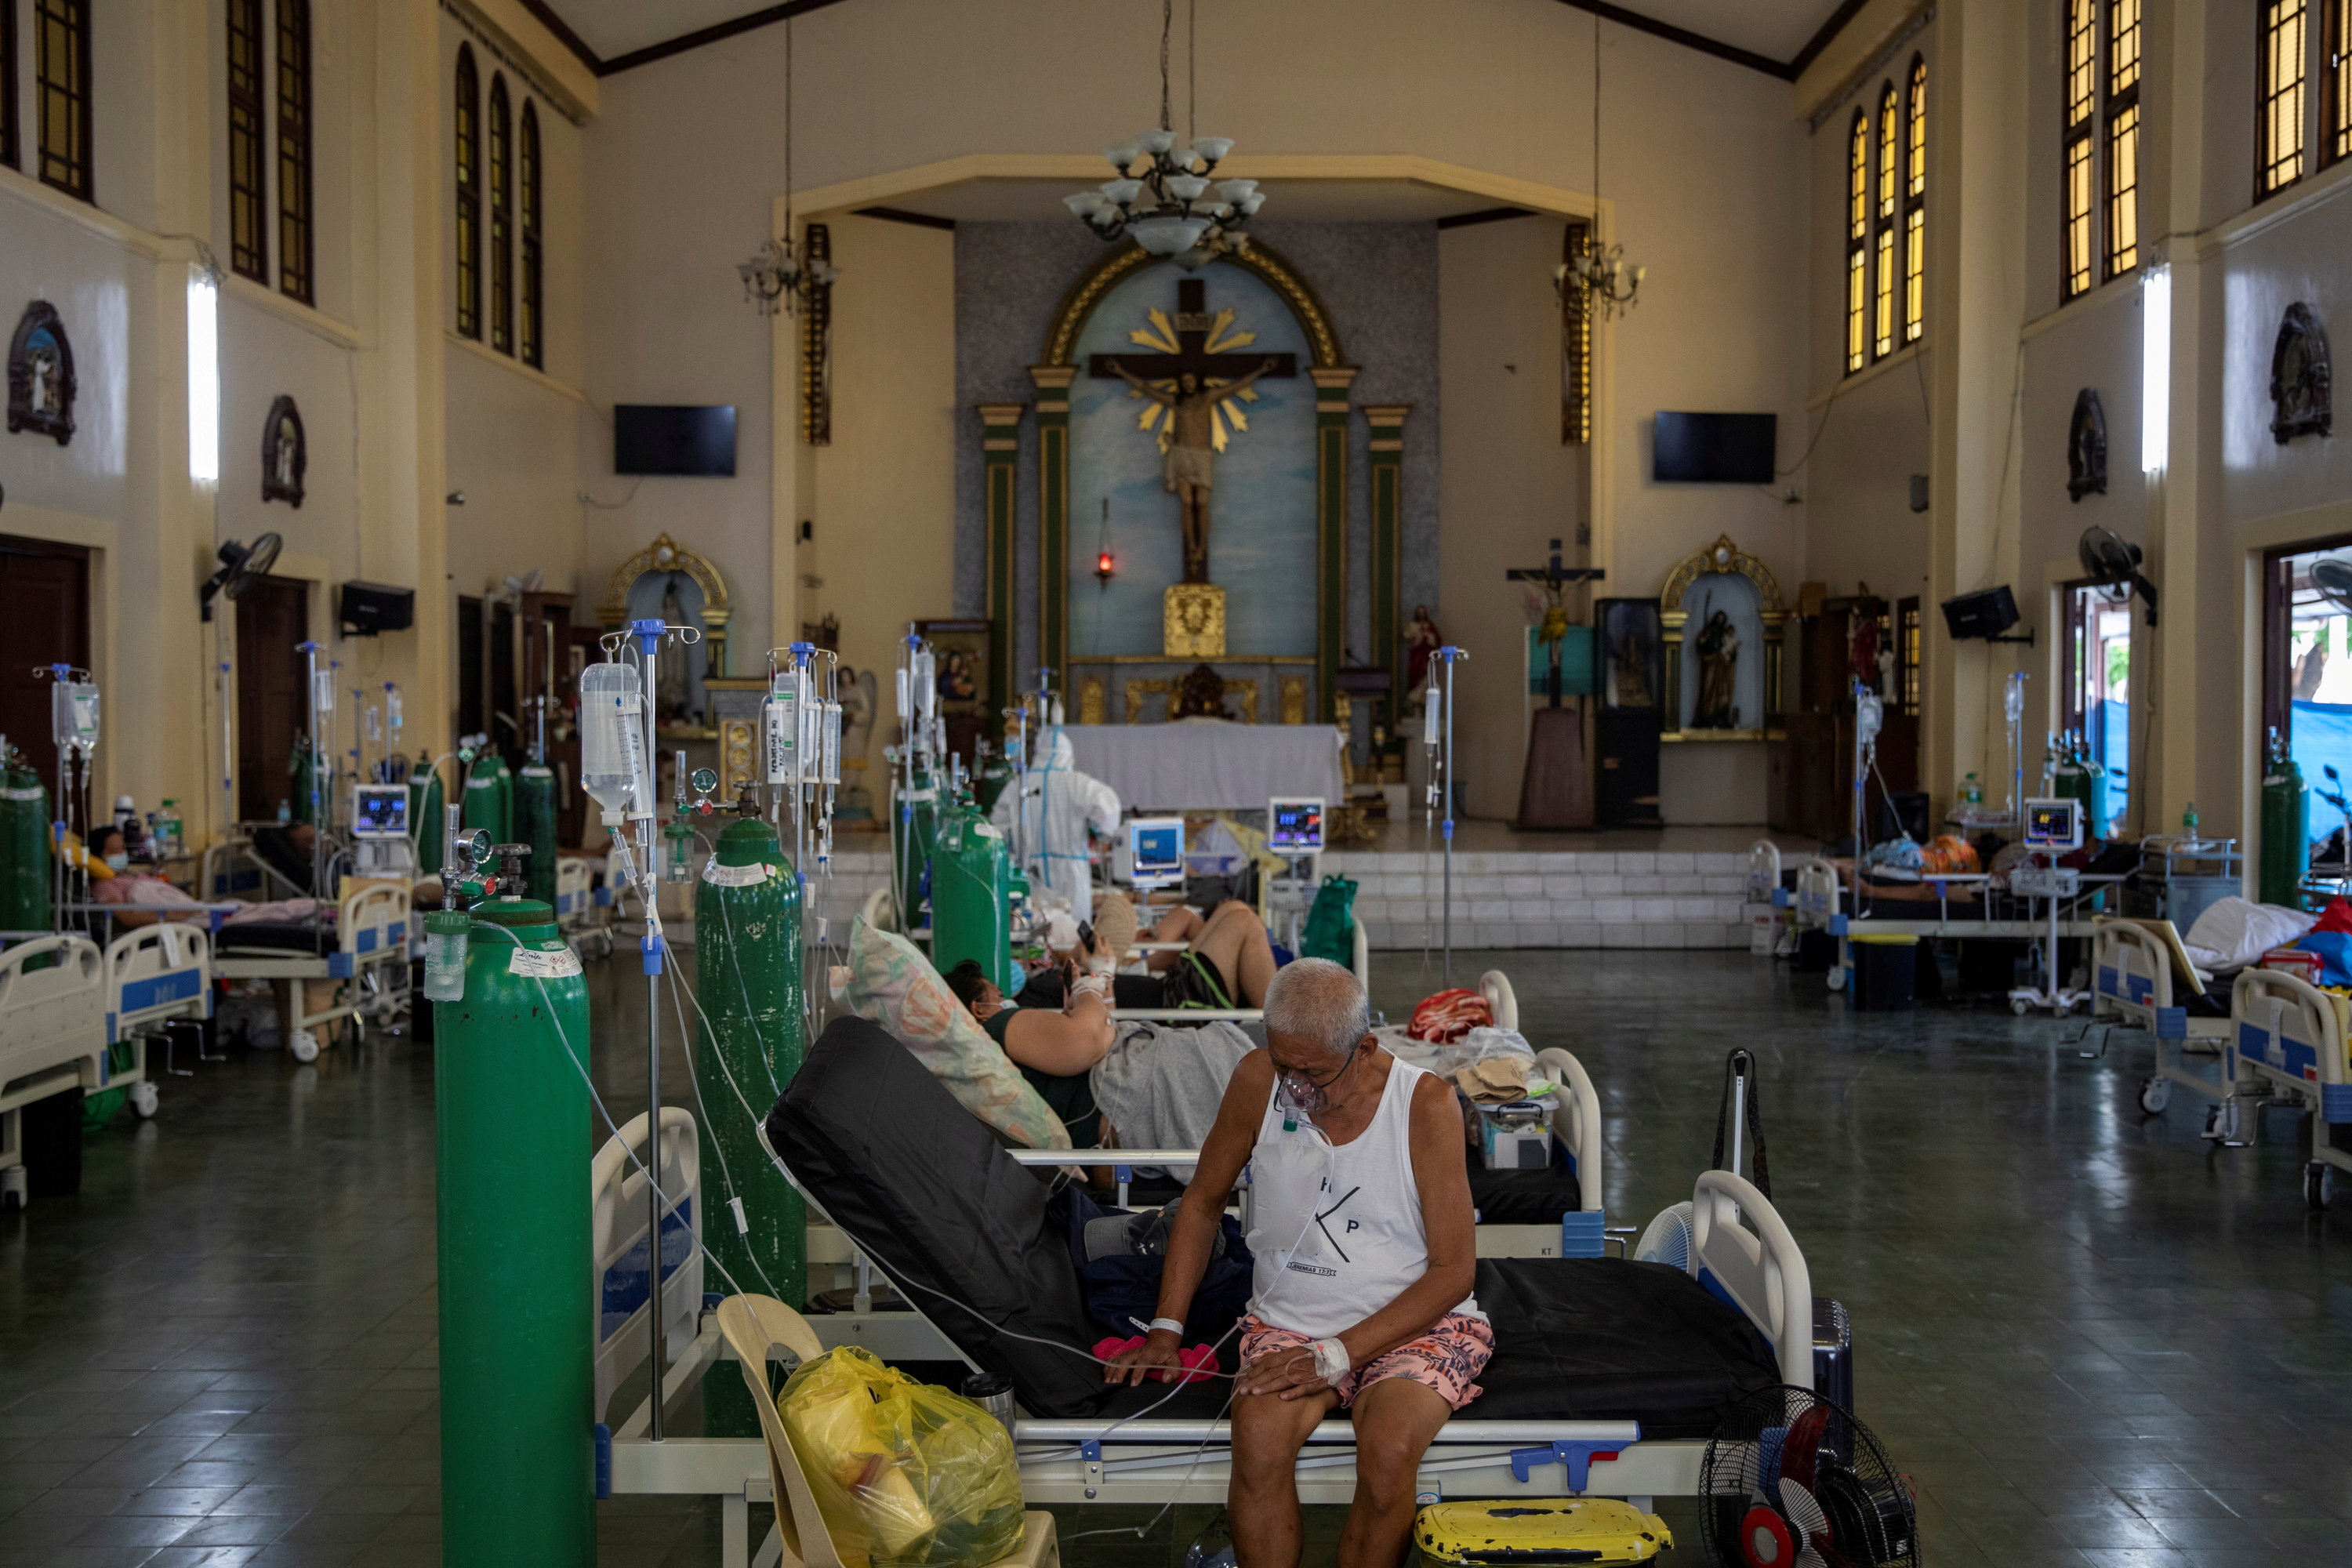 Chapel turned COVID-19 ward amid rising COVID-19 infections in the Philippines